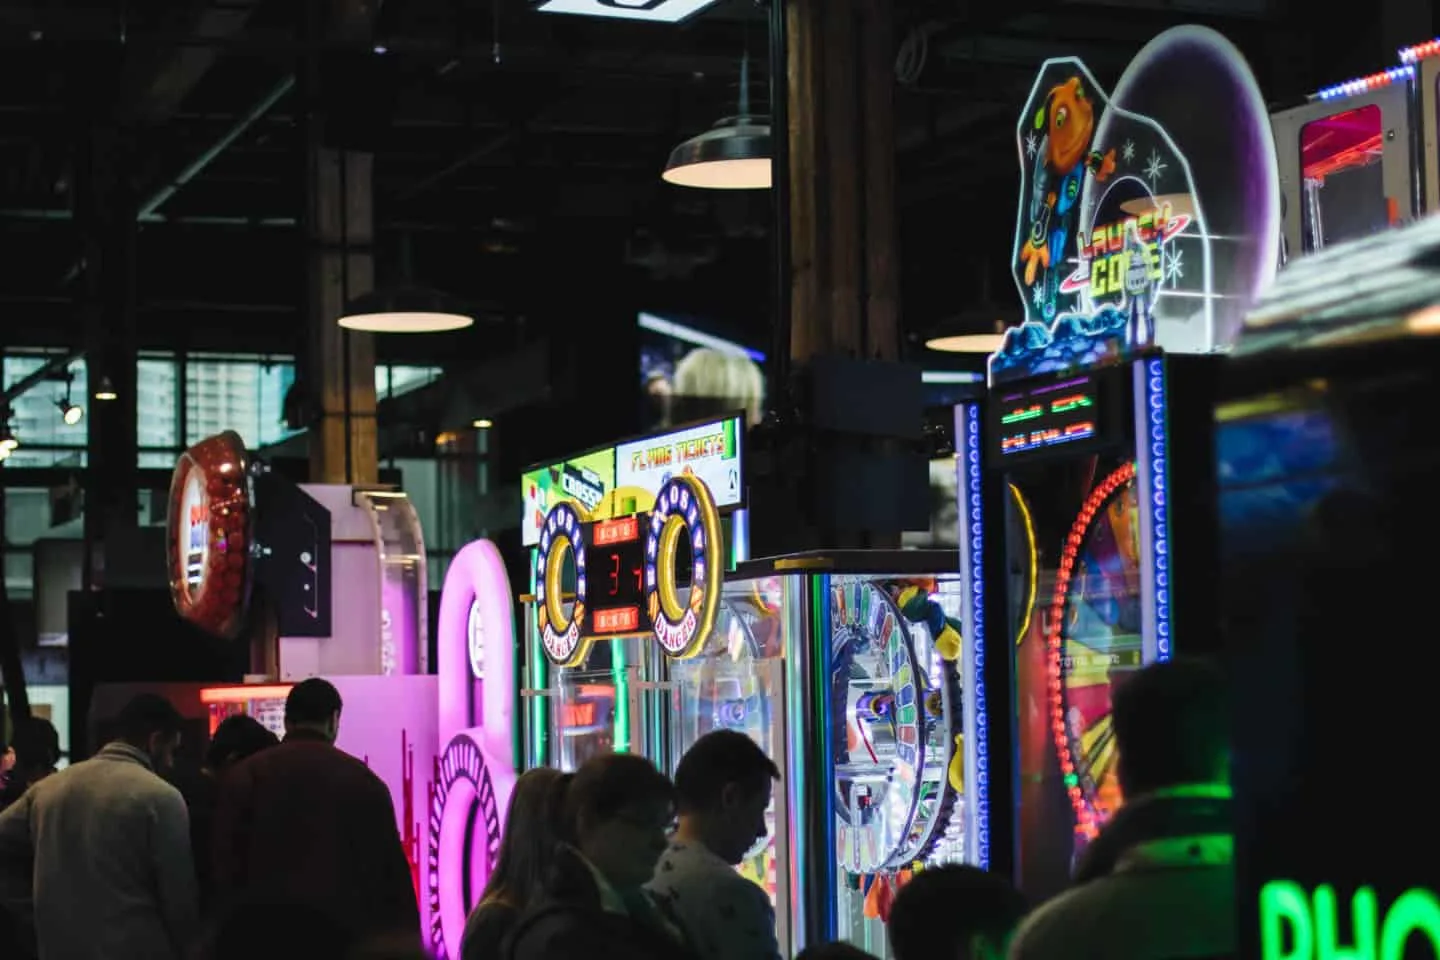 The Rec Room is a fun spot to play arcade games and experience virtual reality in Toronto